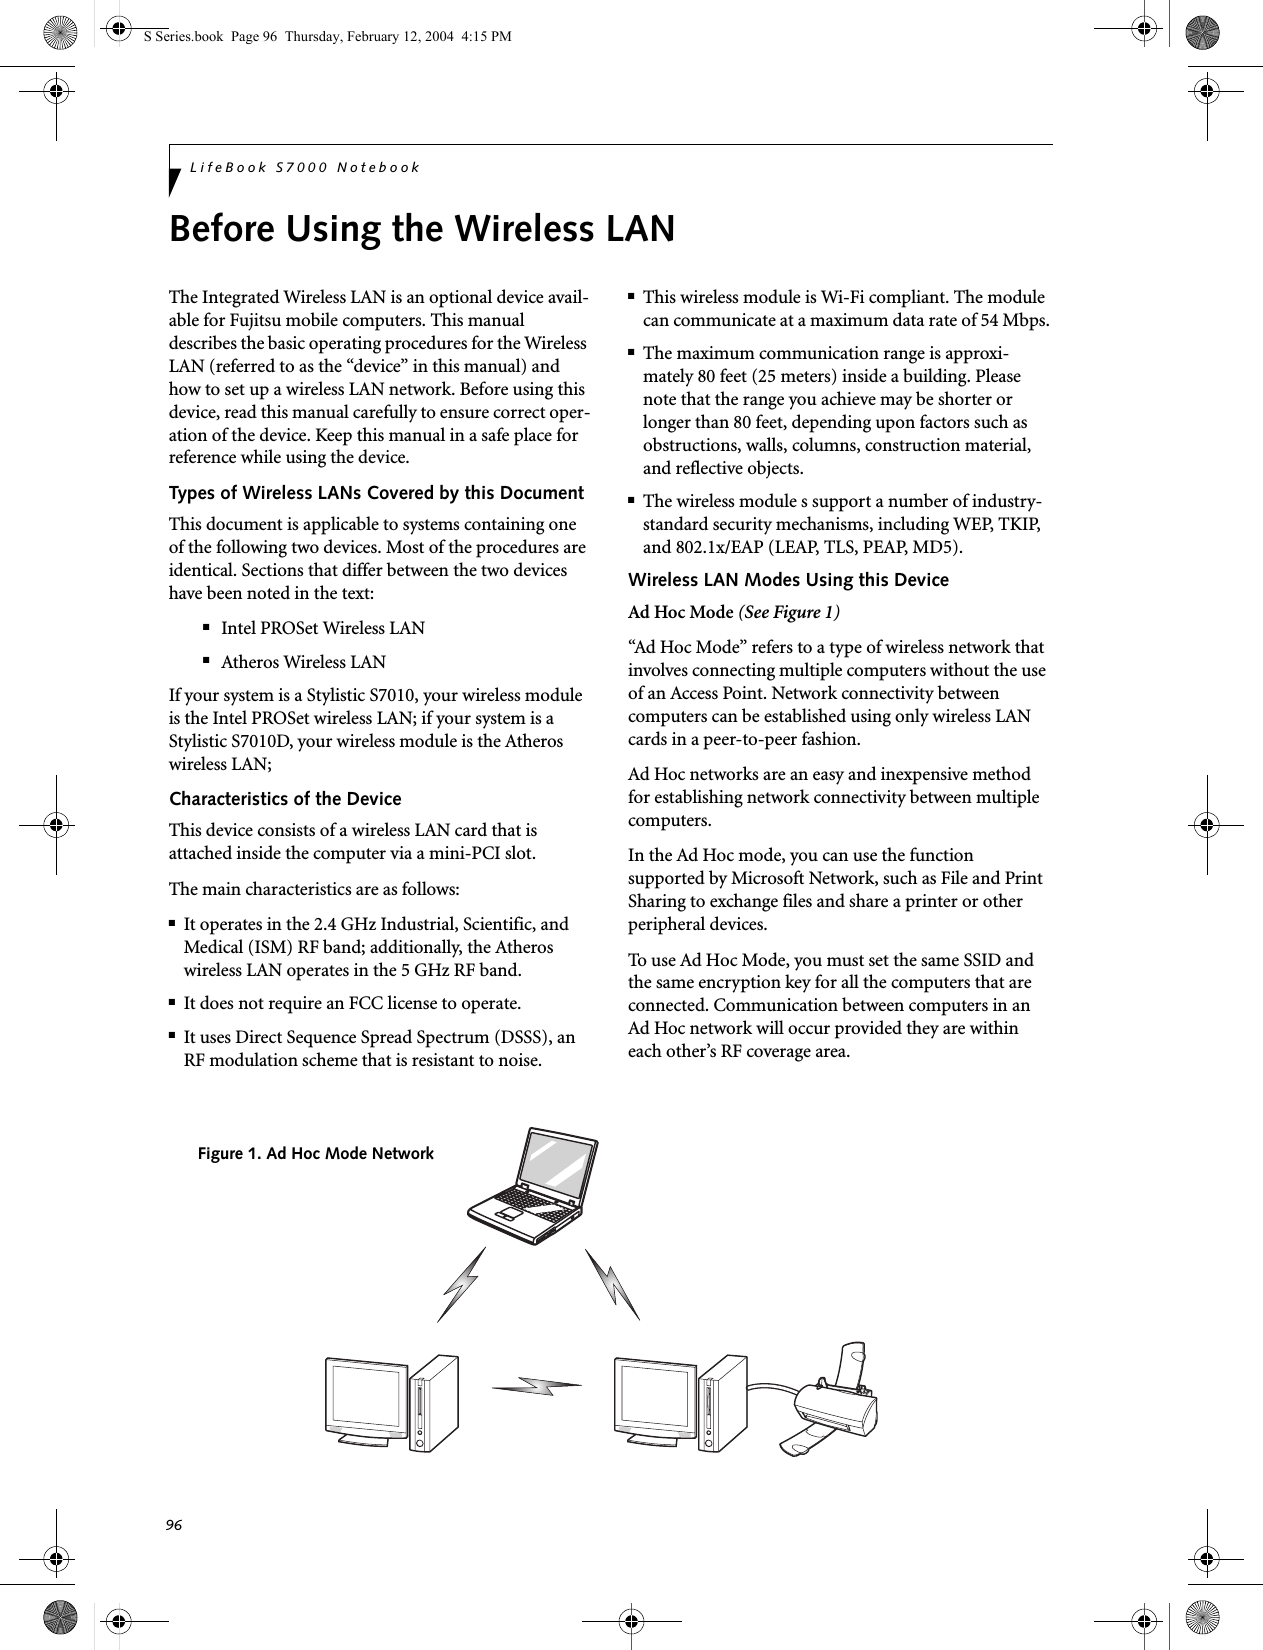 96LifeBook S7000 NotebookBefore Using the Wireless LANThe Integrated Wireless LAN is an optional device avail-able for Fujitsu mobile computers. This manual describes the basic operating procedures for the Wireless LAN (referred to as the “device” in this manual) and how to set up a wireless LAN network. Before using this device, read this manual carefully to ensure correct oper-ation of the device. Keep this manual in a safe place for reference while using the device.Types of Wireless LANs Covered by this DocumentThis document is applicable to systems containing one of the following two devices. Most of the procedures are identical. Sections that differ between the two devices have been noted in the text:■Intel PROSet Wireless LAN■Atheros Wireless LANIf your system is a Stylistic S7010, your wireless module is the Intel PROSet wireless LAN; if your system is a Stylistic S7010D, your wireless module is the Atheros wireless LAN;  Characteristics of the DeviceThis device consists of a wireless LAN card that is attached inside the computer via a mini-PCI slot.The main characteristics are as follows:■It operates in the 2.4 GHz Industrial, Scientific, and Medical (ISM) RF band; additionally, the Atheros wireless LAN operates in the 5 GHz RF band.■It does not require an FCC license to operate.■It uses Direct Sequence Spread Spectrum (DSSS), an RF modulation scheme that is resistant to noise.■This wireless module is Wi-Fi compliant. The module can communicate at a maximum data rate of 54 Mbps.■The maximum communication range is approxi-mately 80 feet (25 meters) inside a building. Please note that the range you achieve may be shorter or longer than 80 feet, depending upon factors such as obstructions, walls, columns, construction material, and reflective objects.■The wireless module s support a number of industry-standard security mechanisms, including WEP, TKIP, and 802.1x/EAP (LEAP, TLS, PEAP, MD5).Wireless LAN Modes Using this DeviceAd Hoc Mode (See Figure 1)“Ad Hoc Mode” refers to a type of wireless network that involves connecting multiple computers without the use of an Access Point. Network connectivity between computers can be established using only wireless LAN cards in a peer-to-peer fashion.Ad Hoc networks are an easy and inexpensive method for establishing network connectivity between multiple computers.In the Ad Hoc mode, you can use the function supported by Microsoft Network, such as File and Print Sharing to exchange files and share a printer or other peripheral devices.To use Ad Hoc Mode, you must set the same SSID and the same encryption key for all the computers that are connected. Communication between computers in an Ad Hoc network will occur provided they are within each other’s RF coverage area. Figure 1. Ad Hoc Mode NetworkS Series.book  Page 96  Thursday, February 12, 2004  4:15 PM